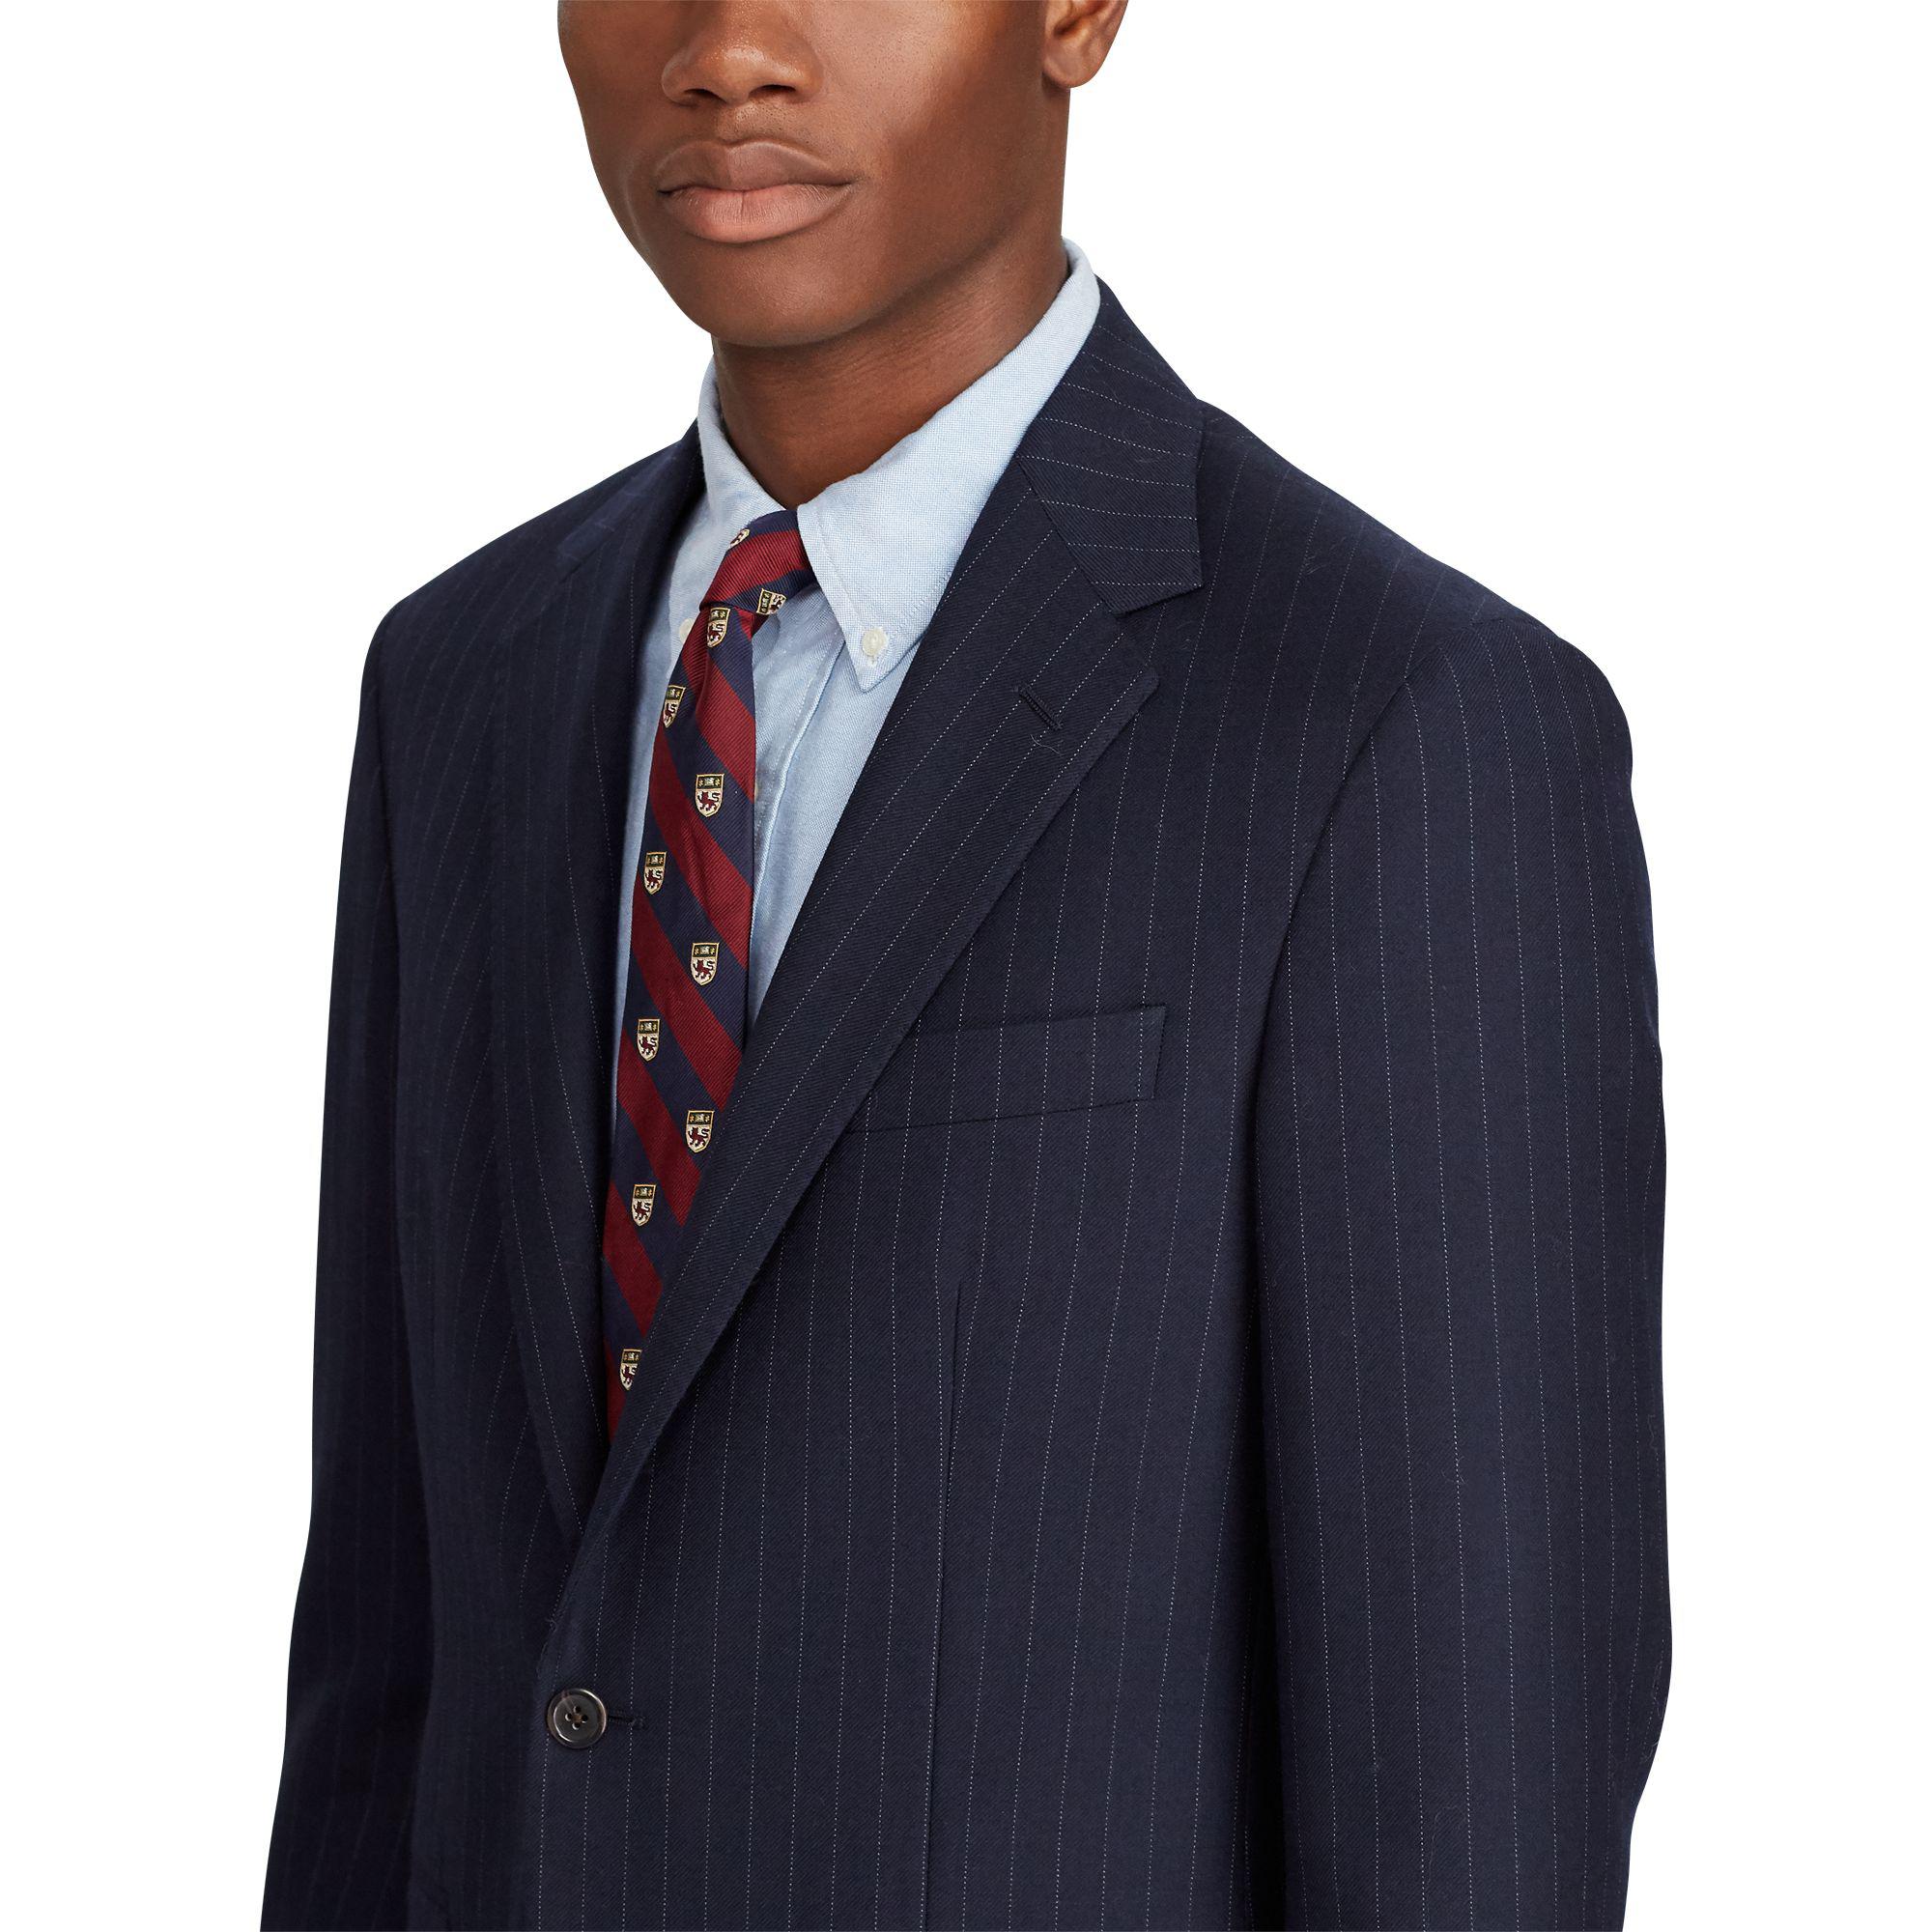 ralph lauren striped suit > Up to 72% OFF > Free shipping